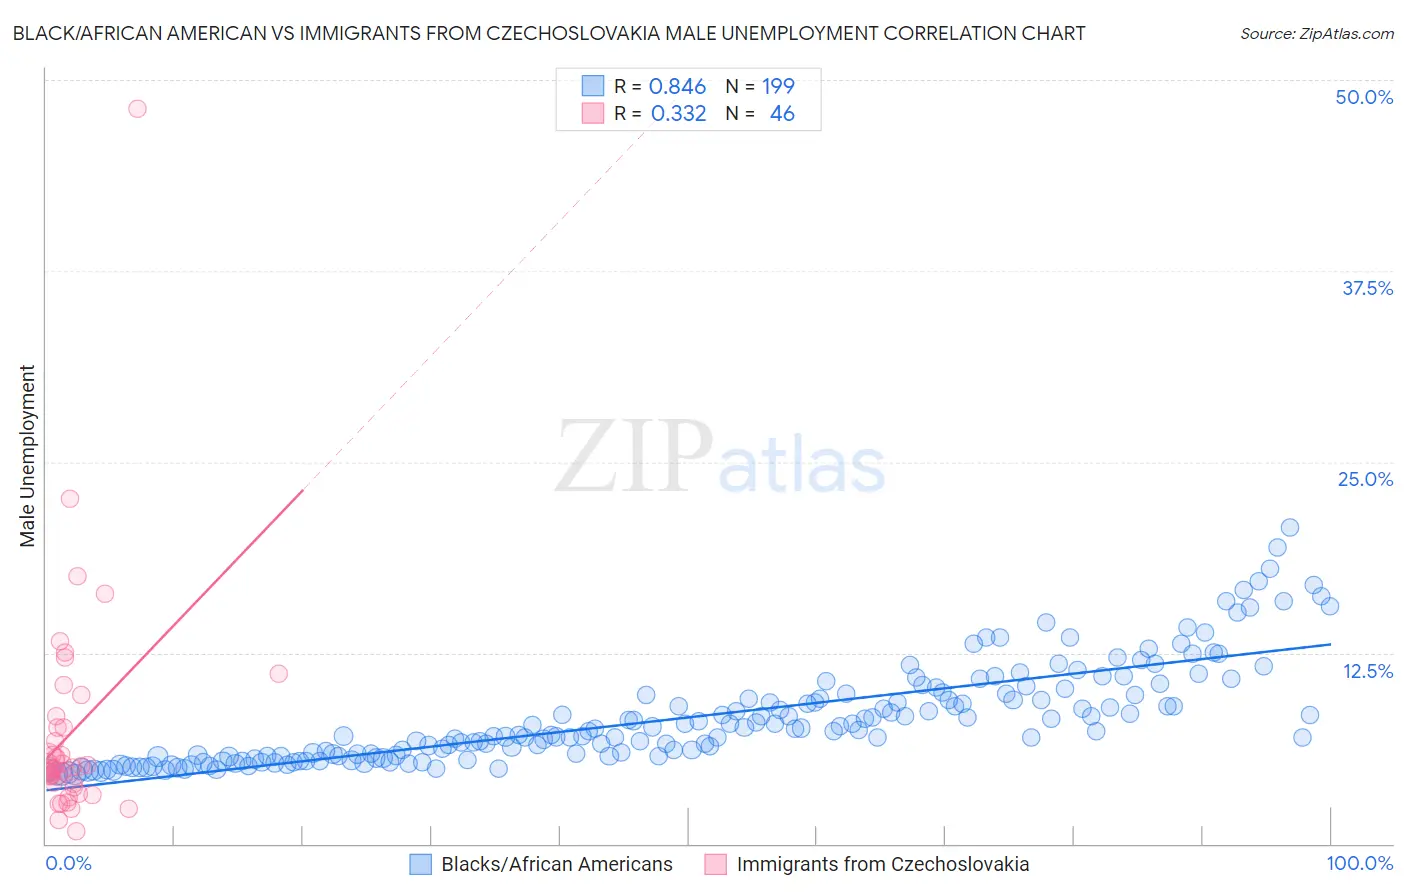 Black/African American vs Immigrants from Czechoslovakia Male Unemployment